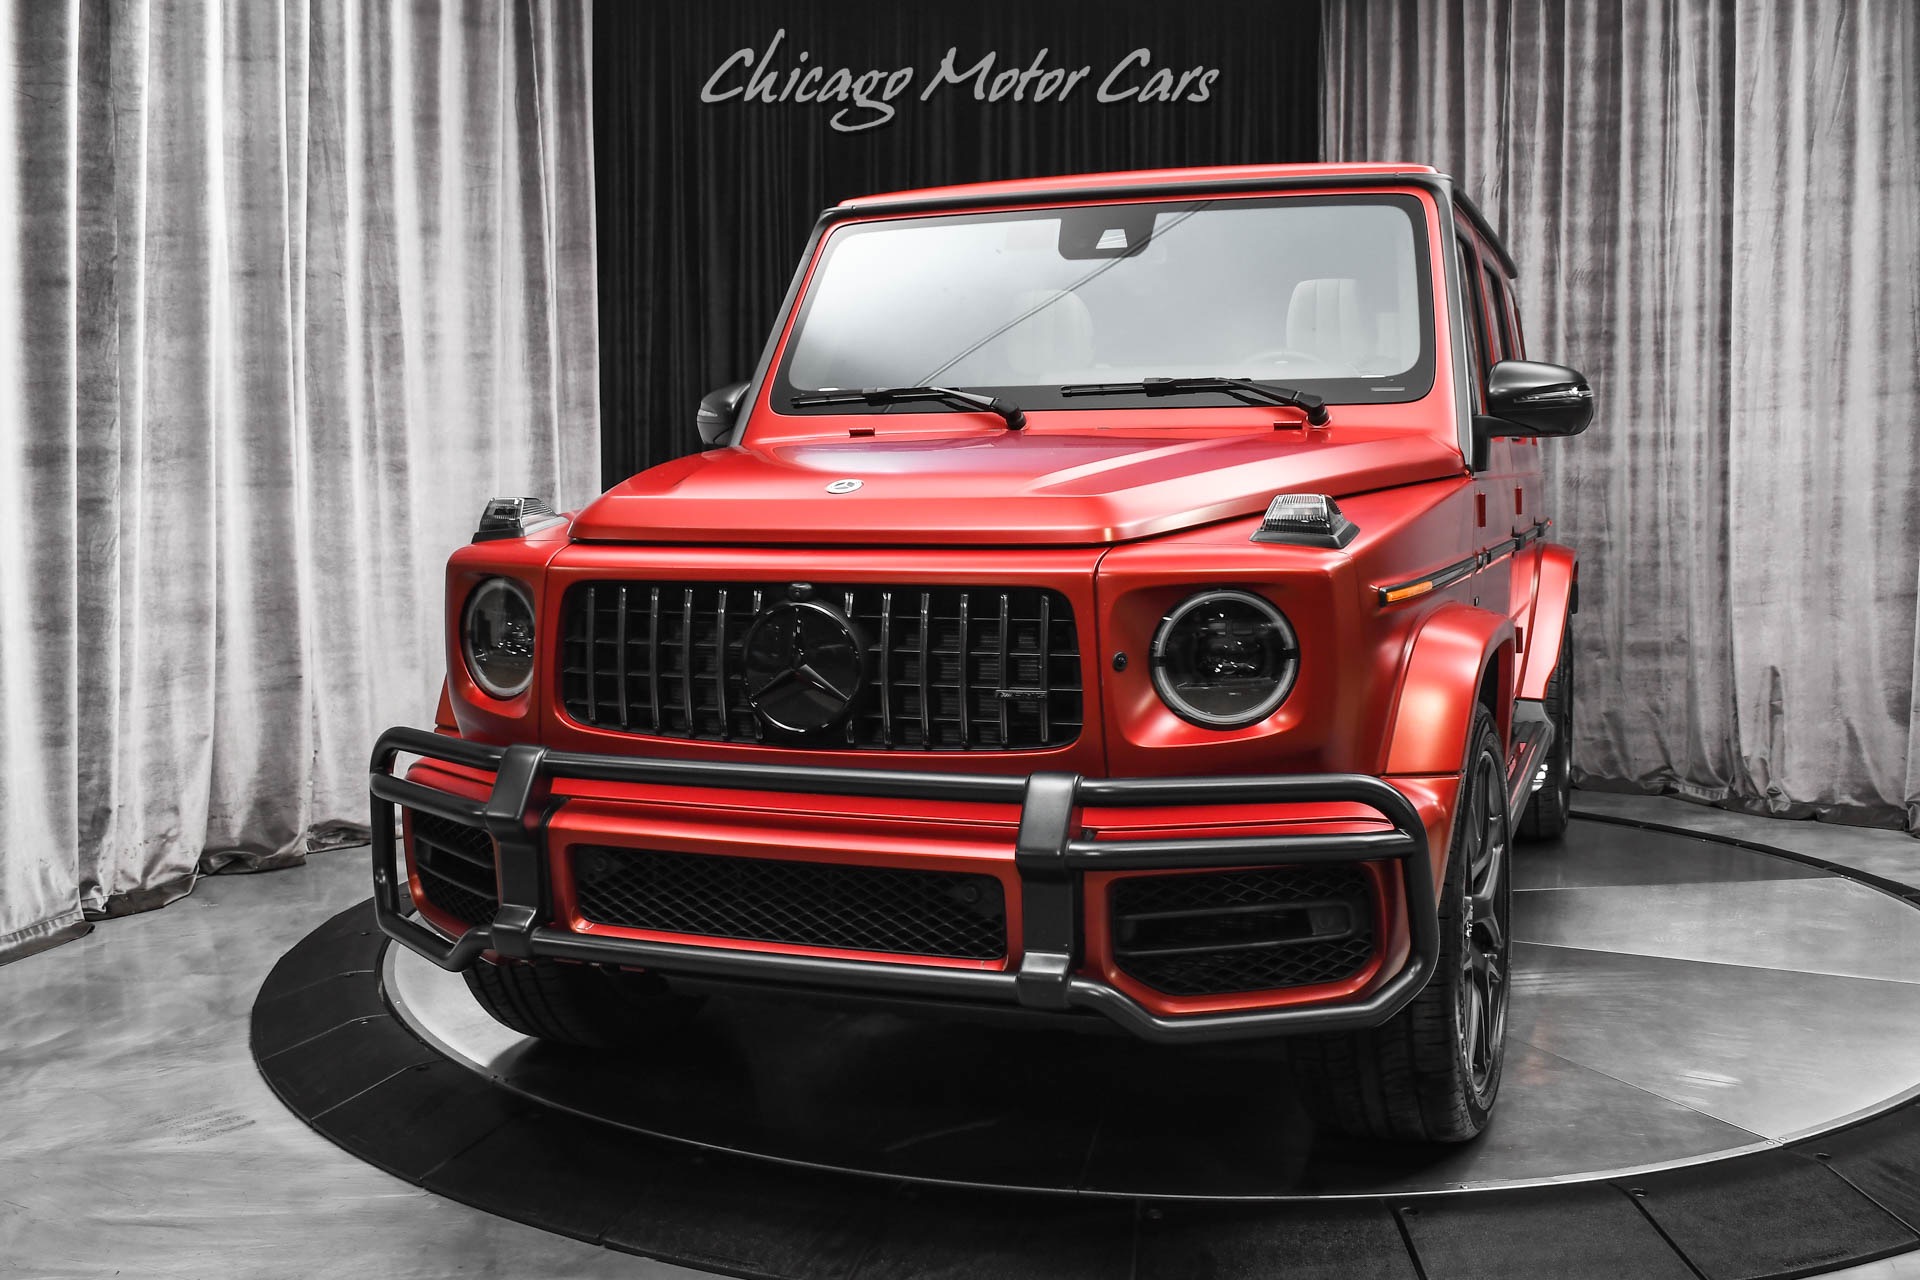 Used-2021-Mercedes-Benz-G63-AMG-4Matic-Rare-Manufaktur-Exclusive-Edition-Hyazinth-Red-Matte